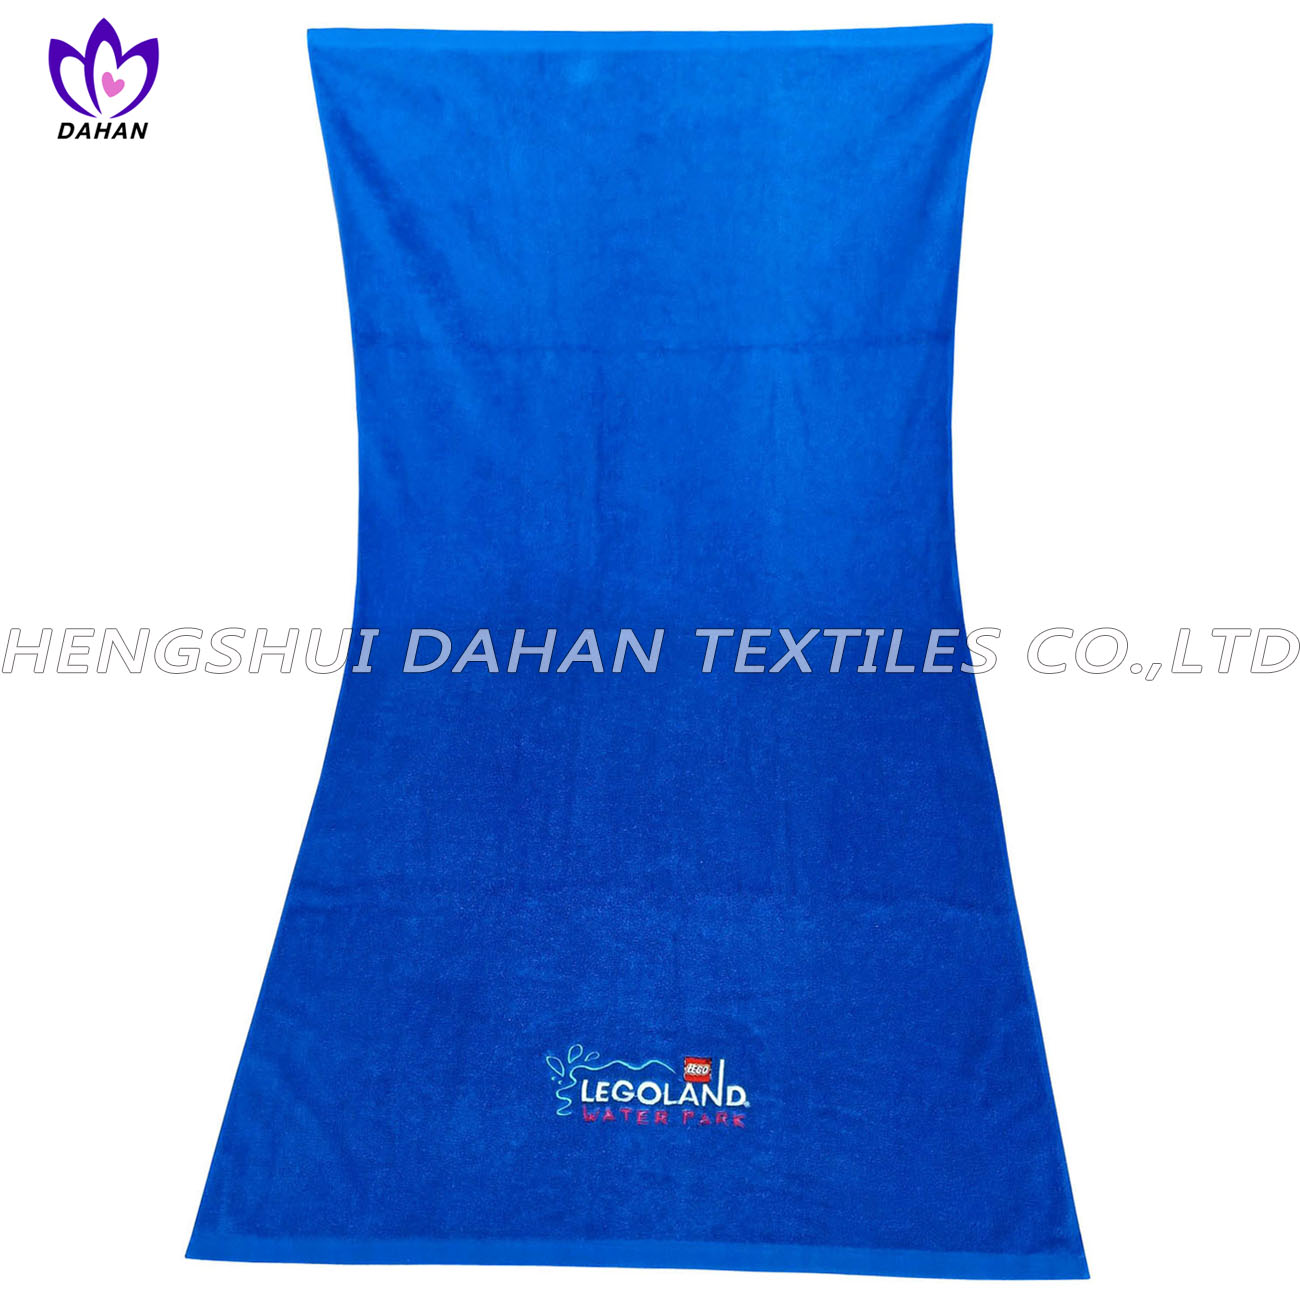 DH-AD01 100% cotton Embroidered bath towel. 